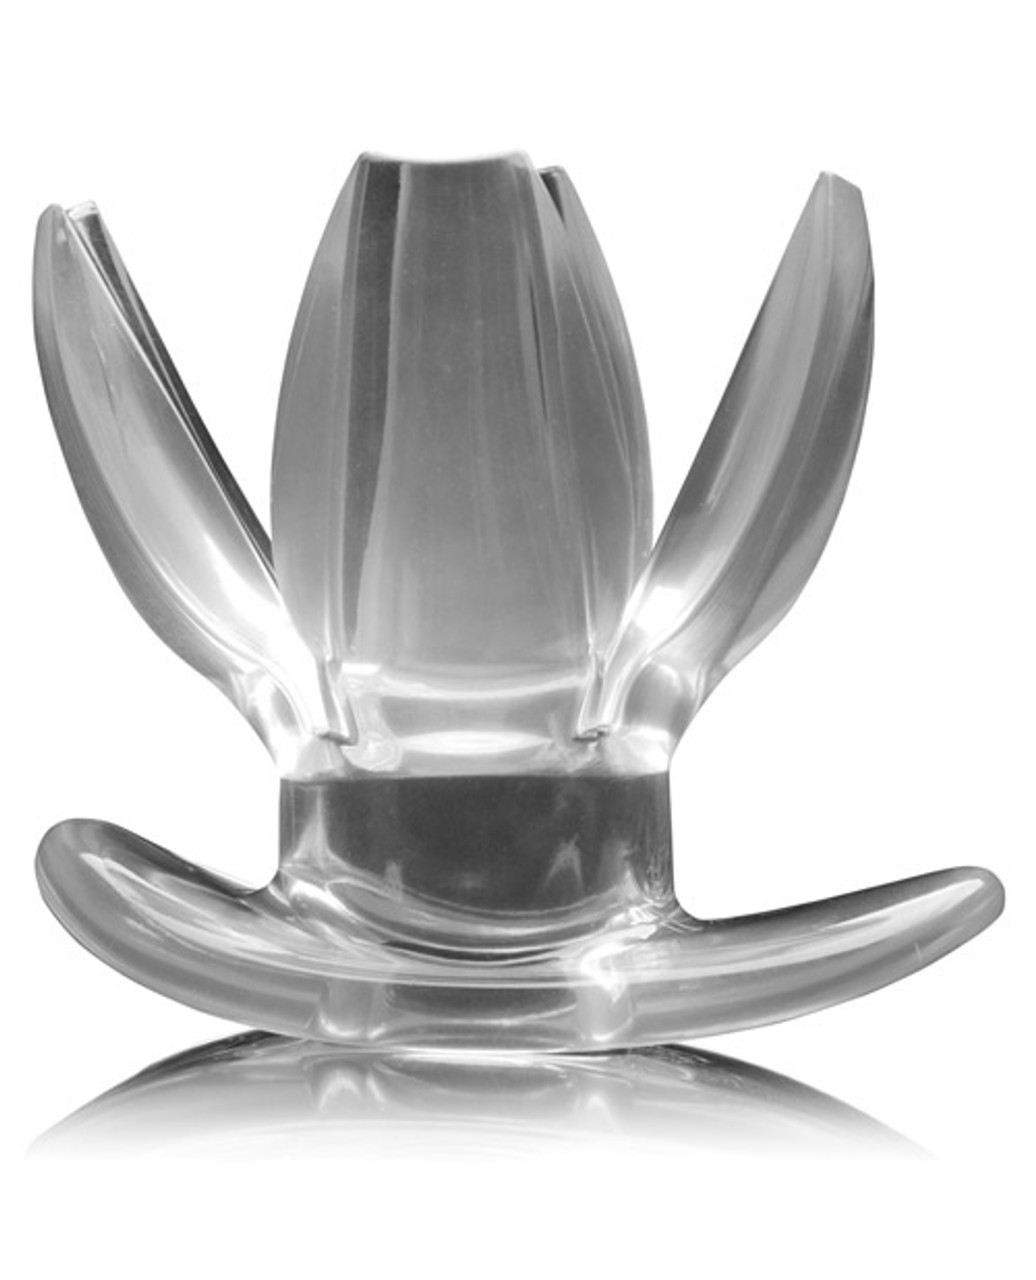 Master Series Clawed Expanding Clear Dilator